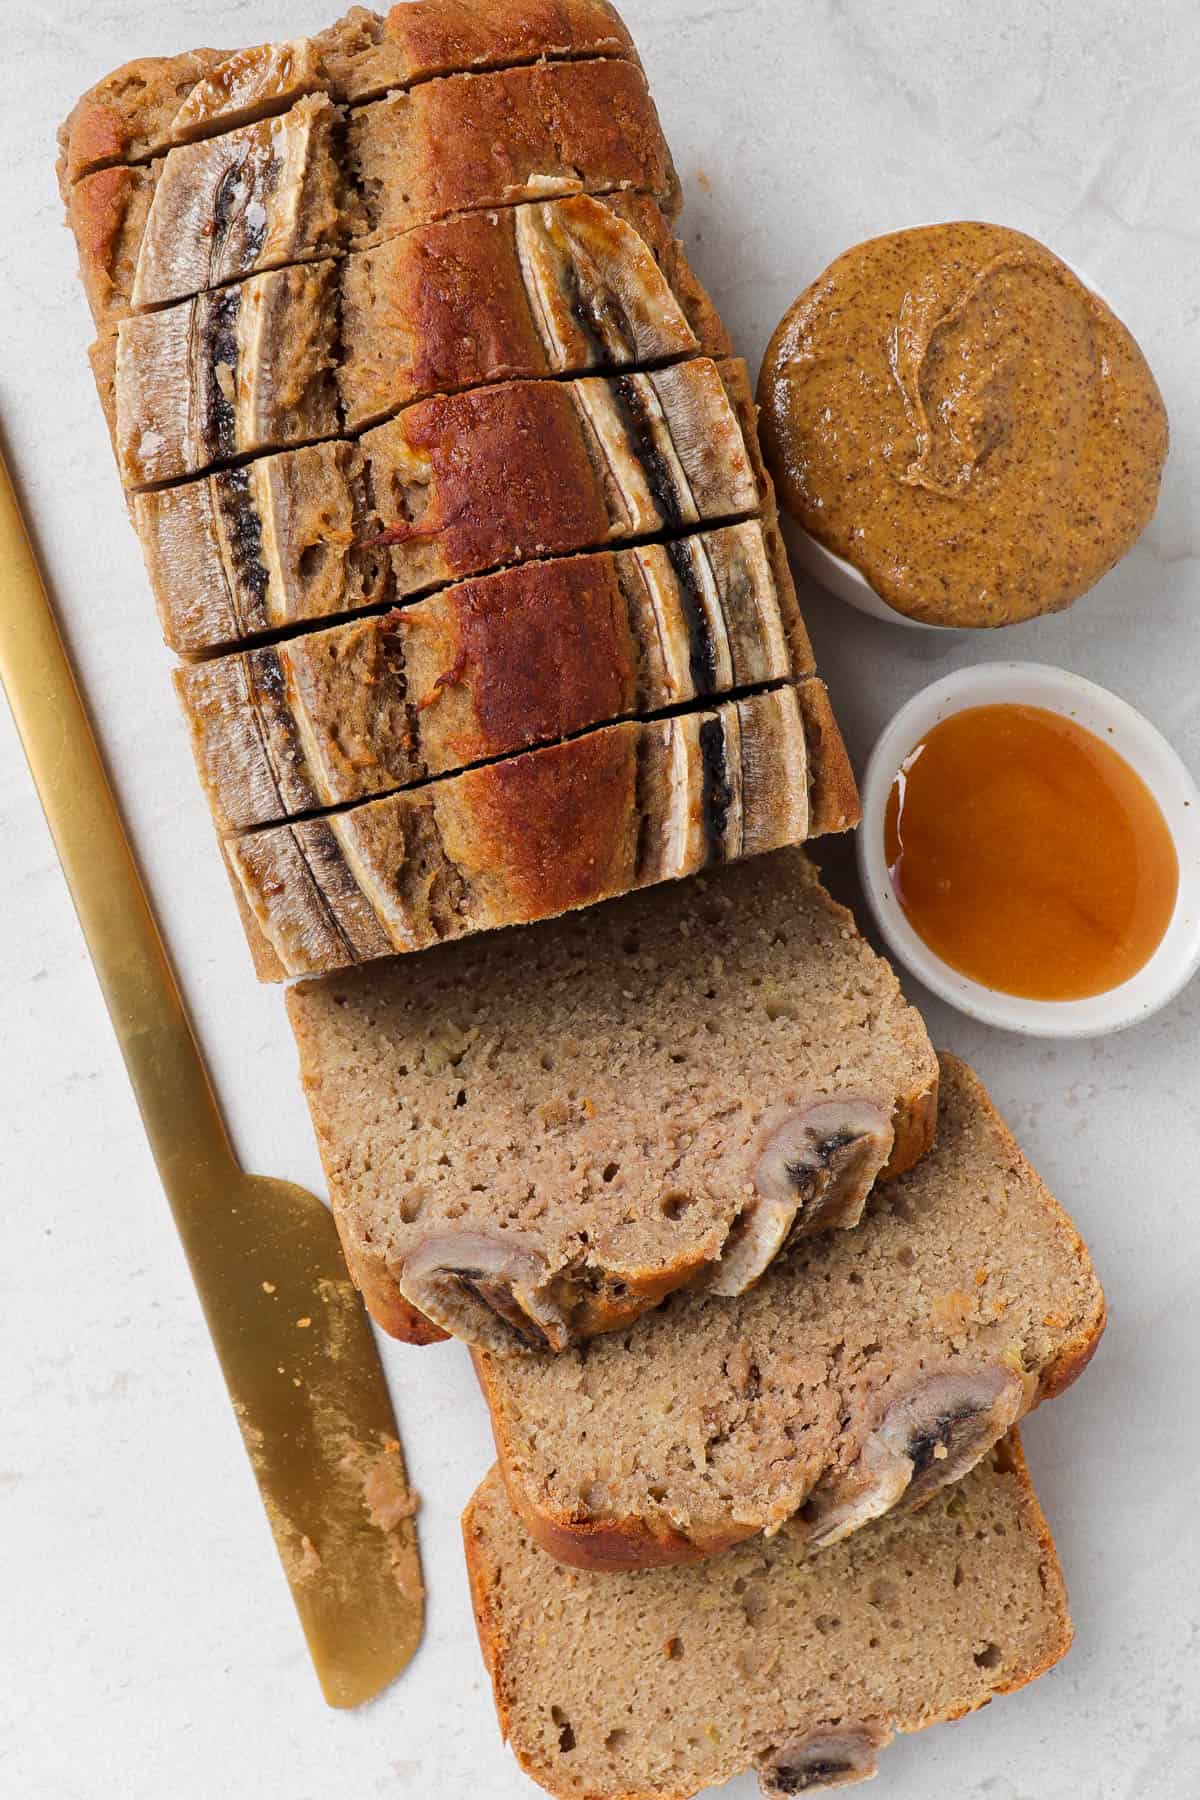 Sliced bread with honey and almond butter in mini dishes on the side.